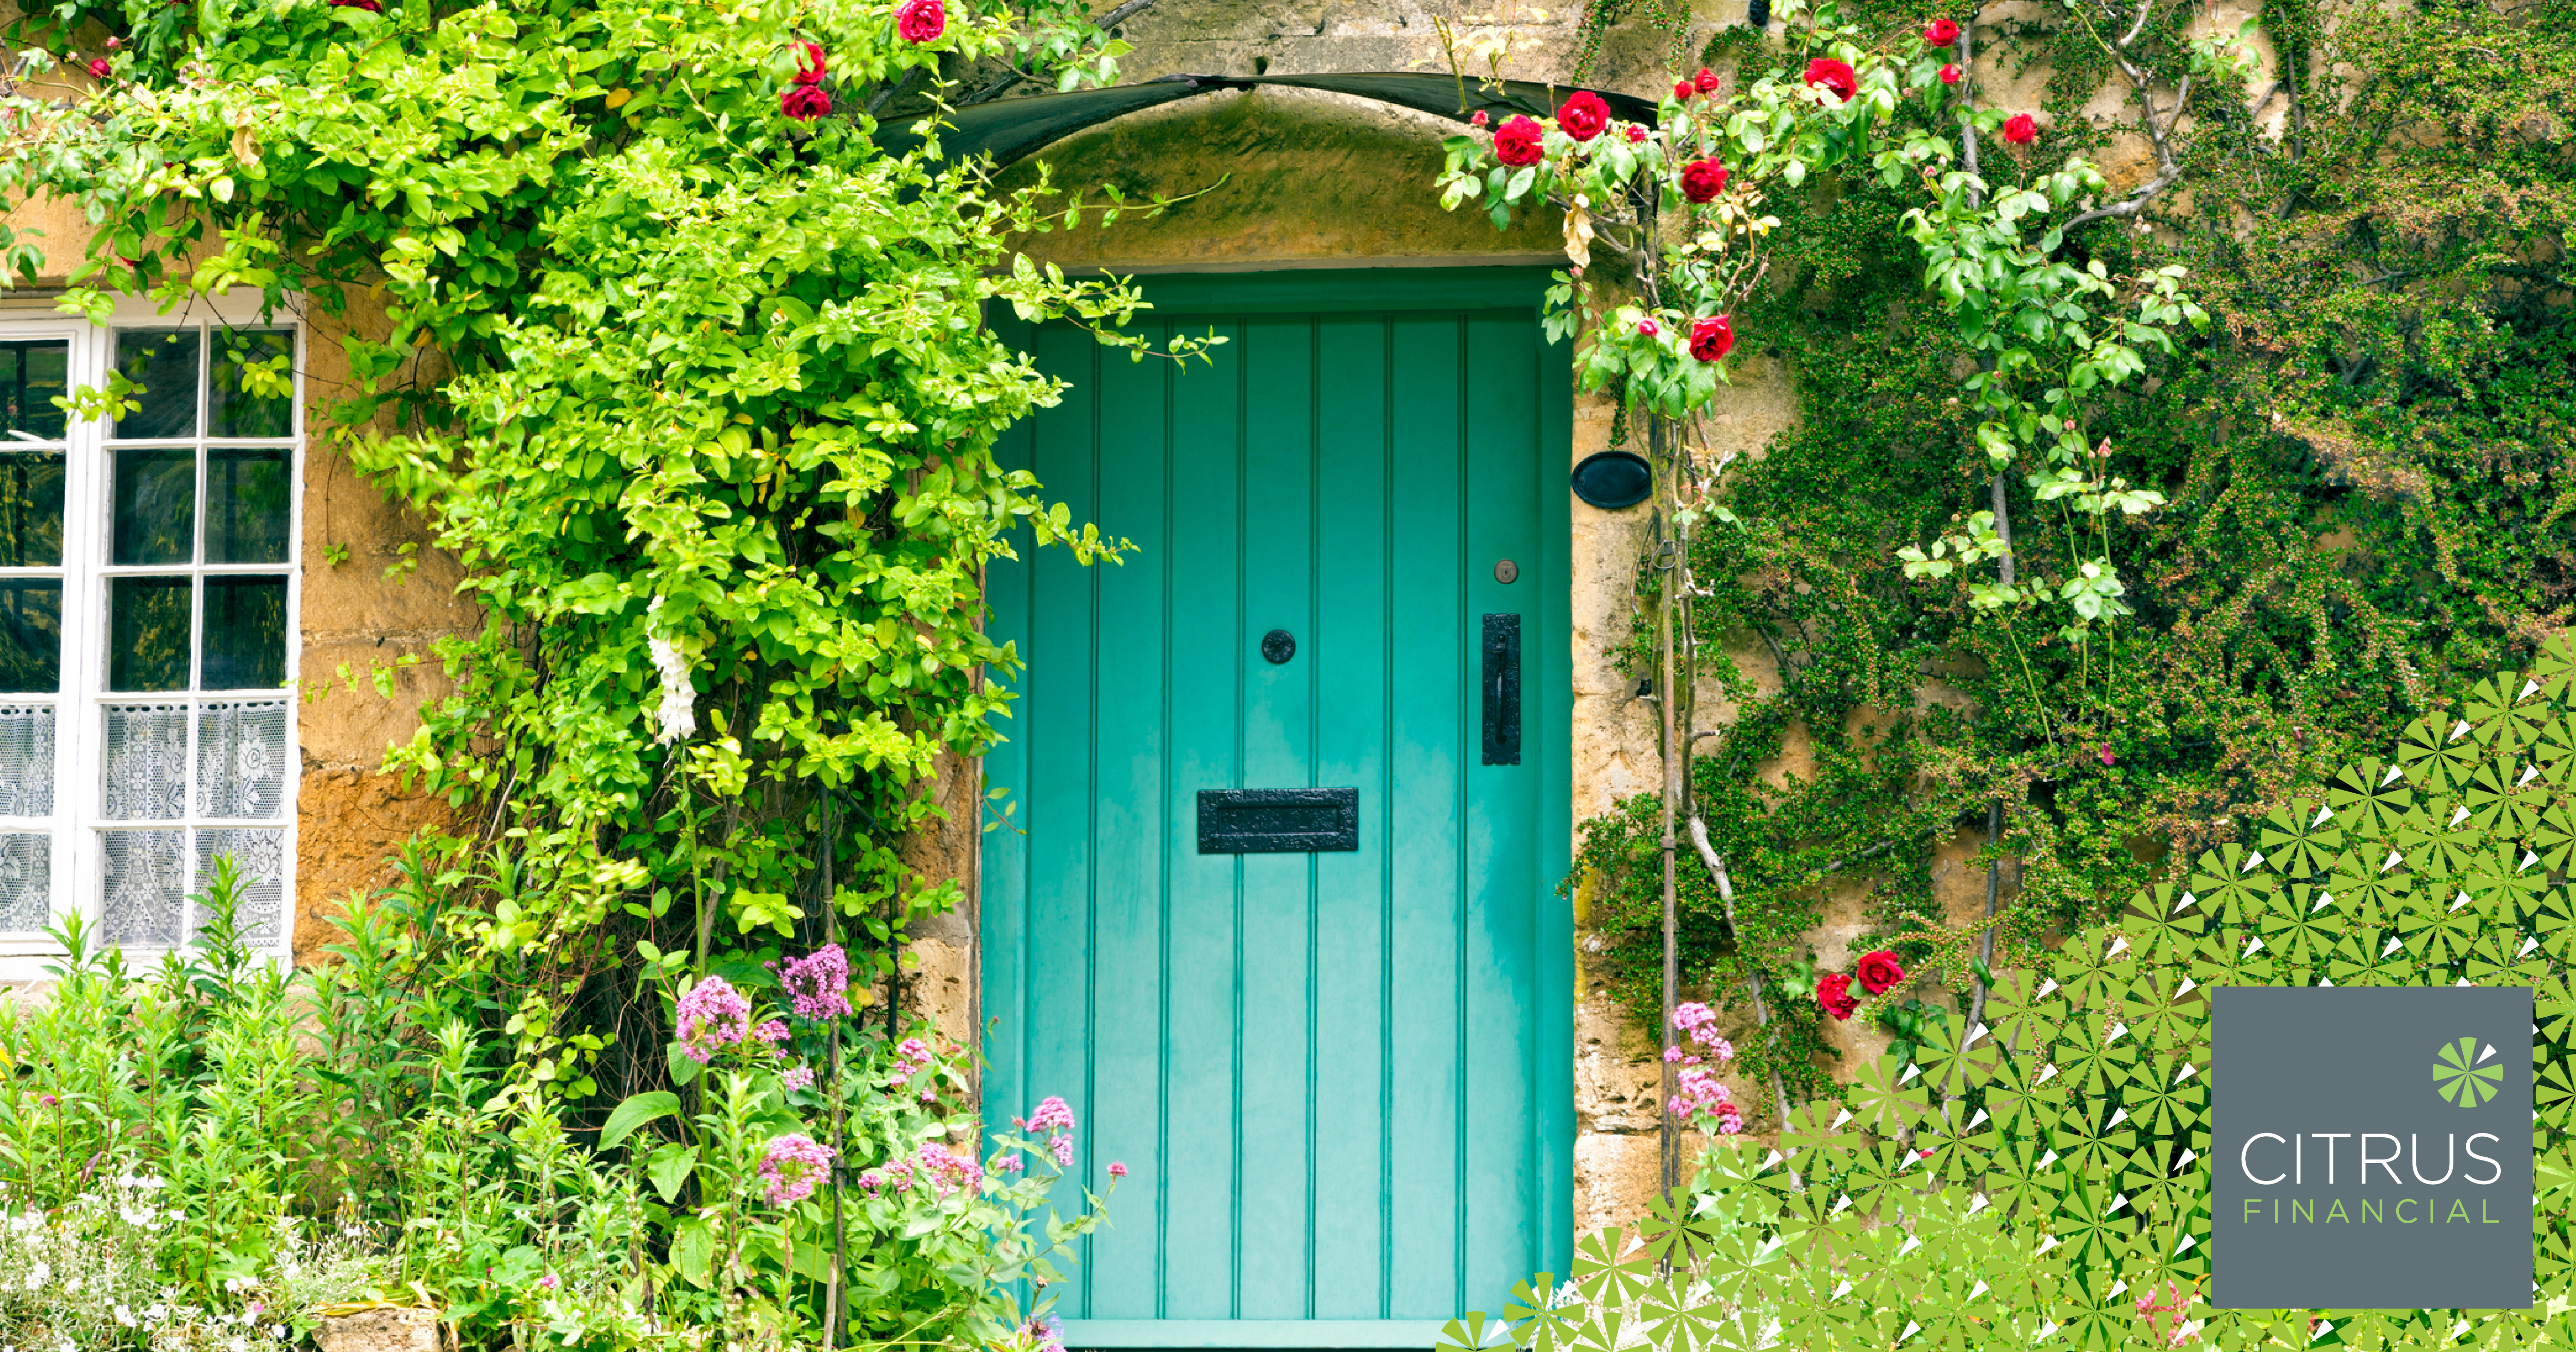 A green front door for a country cottage surrounded by red roses